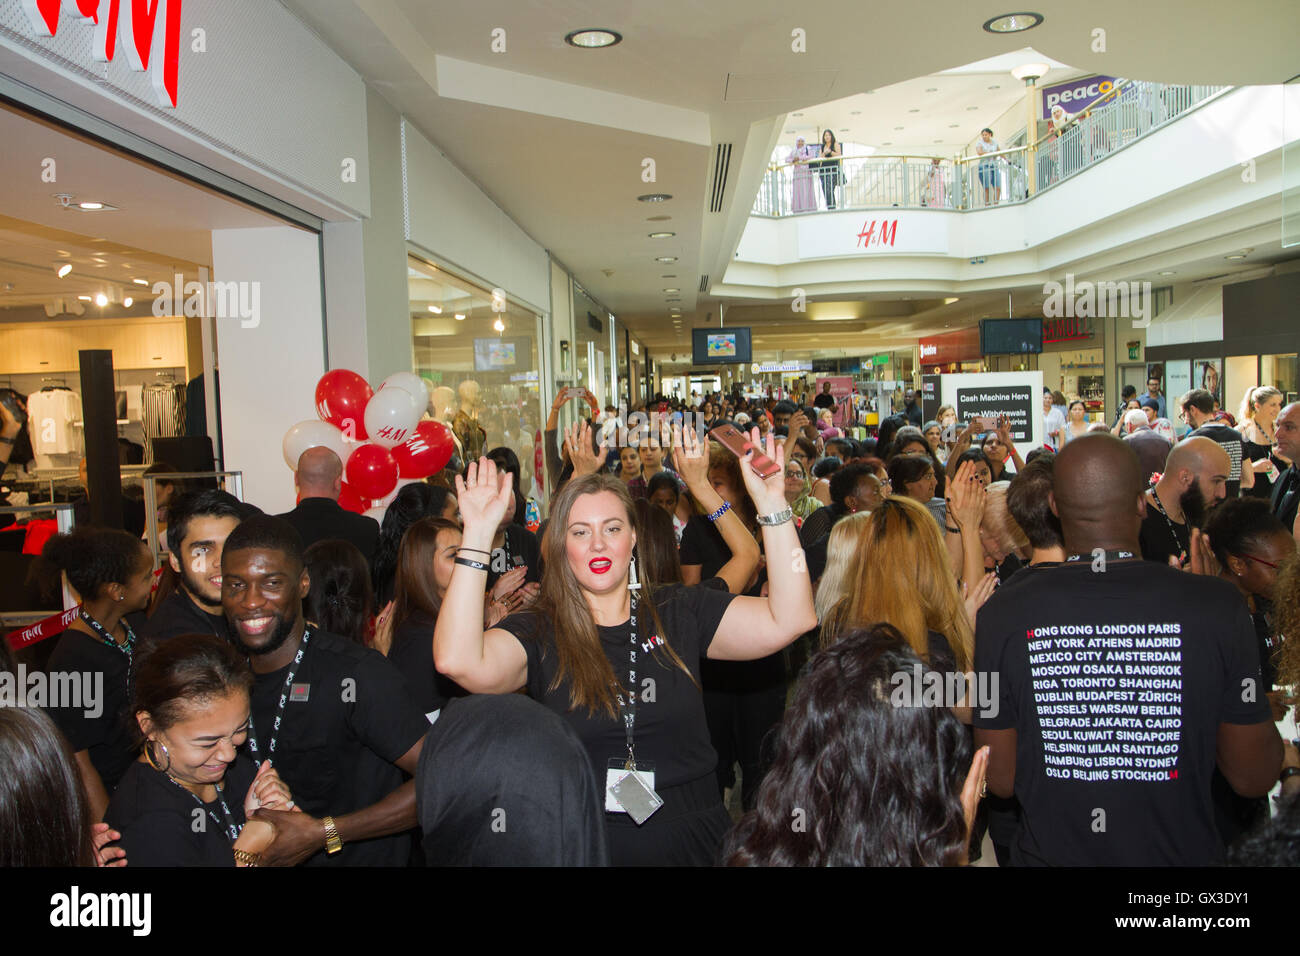 London, UK. 15th September 2016. H&M staff get ready to welcome Ilford  residents and visitors queueing up as a new H&M store opens its doors in  Exchange Mall Ilford in Essex. Customers